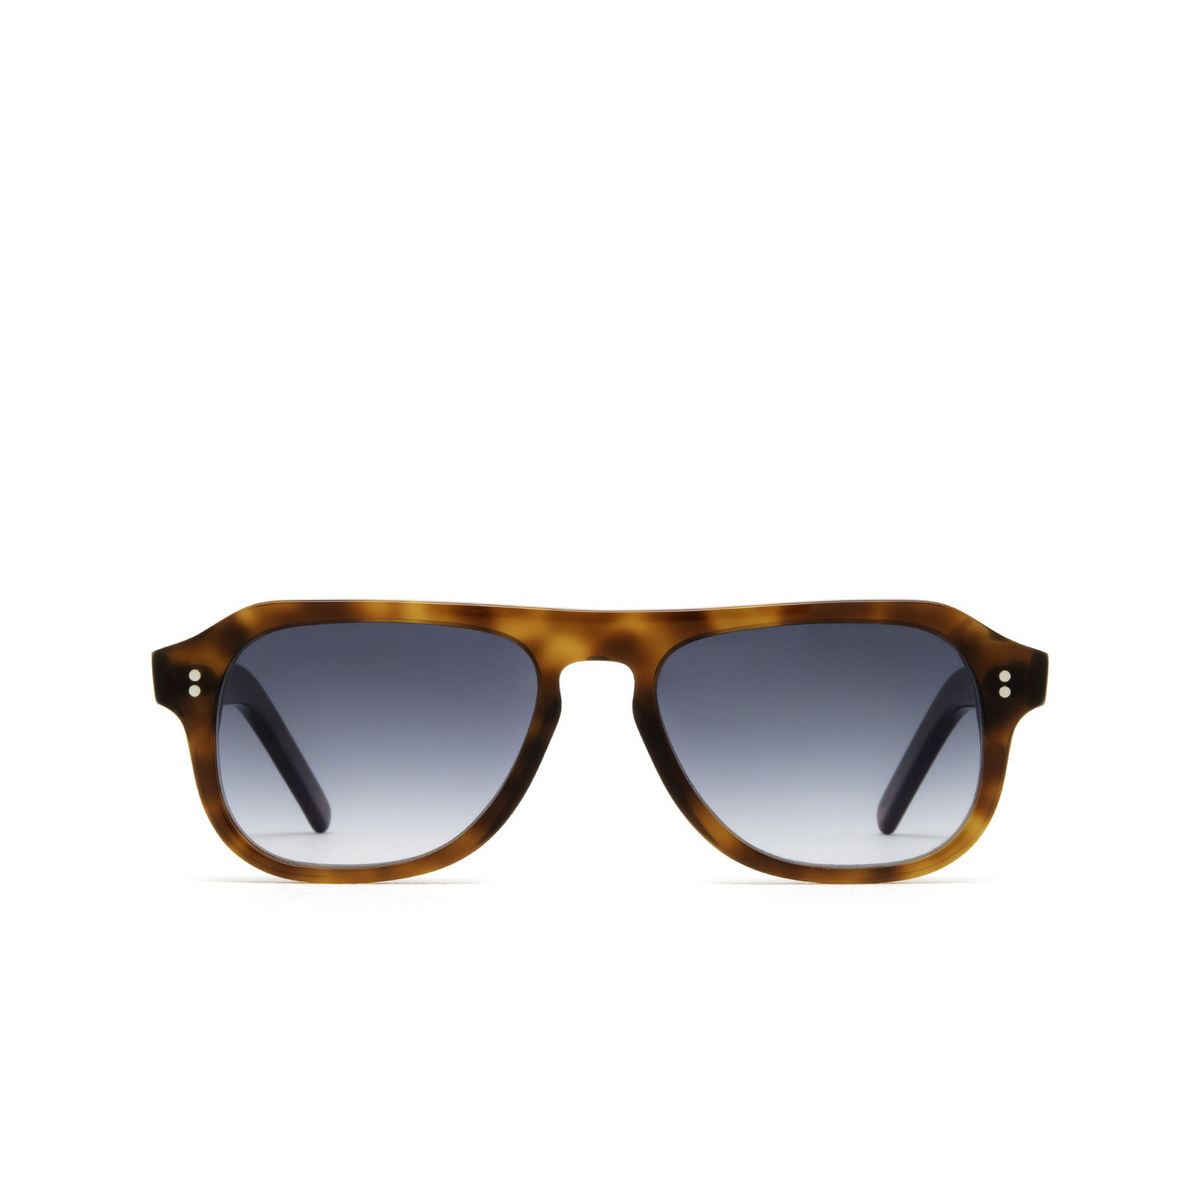 Cutler and Gross® Aviator Sunglasses: 0822/S2 SUN color Ground Cloves Grcl - front view.